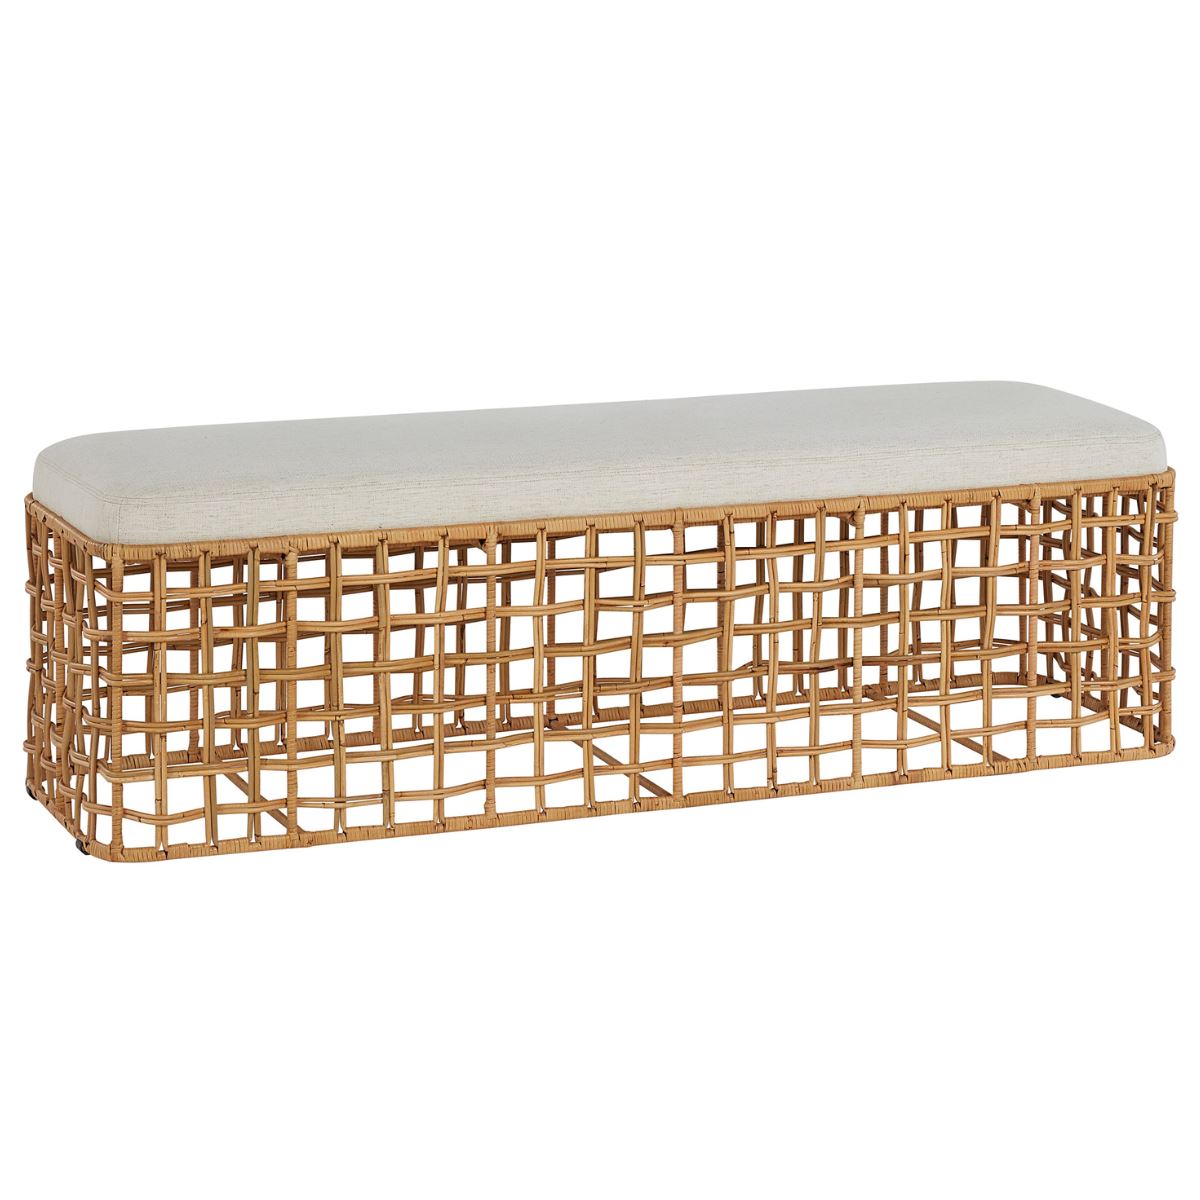 Sira Rattan Bench. Front view.